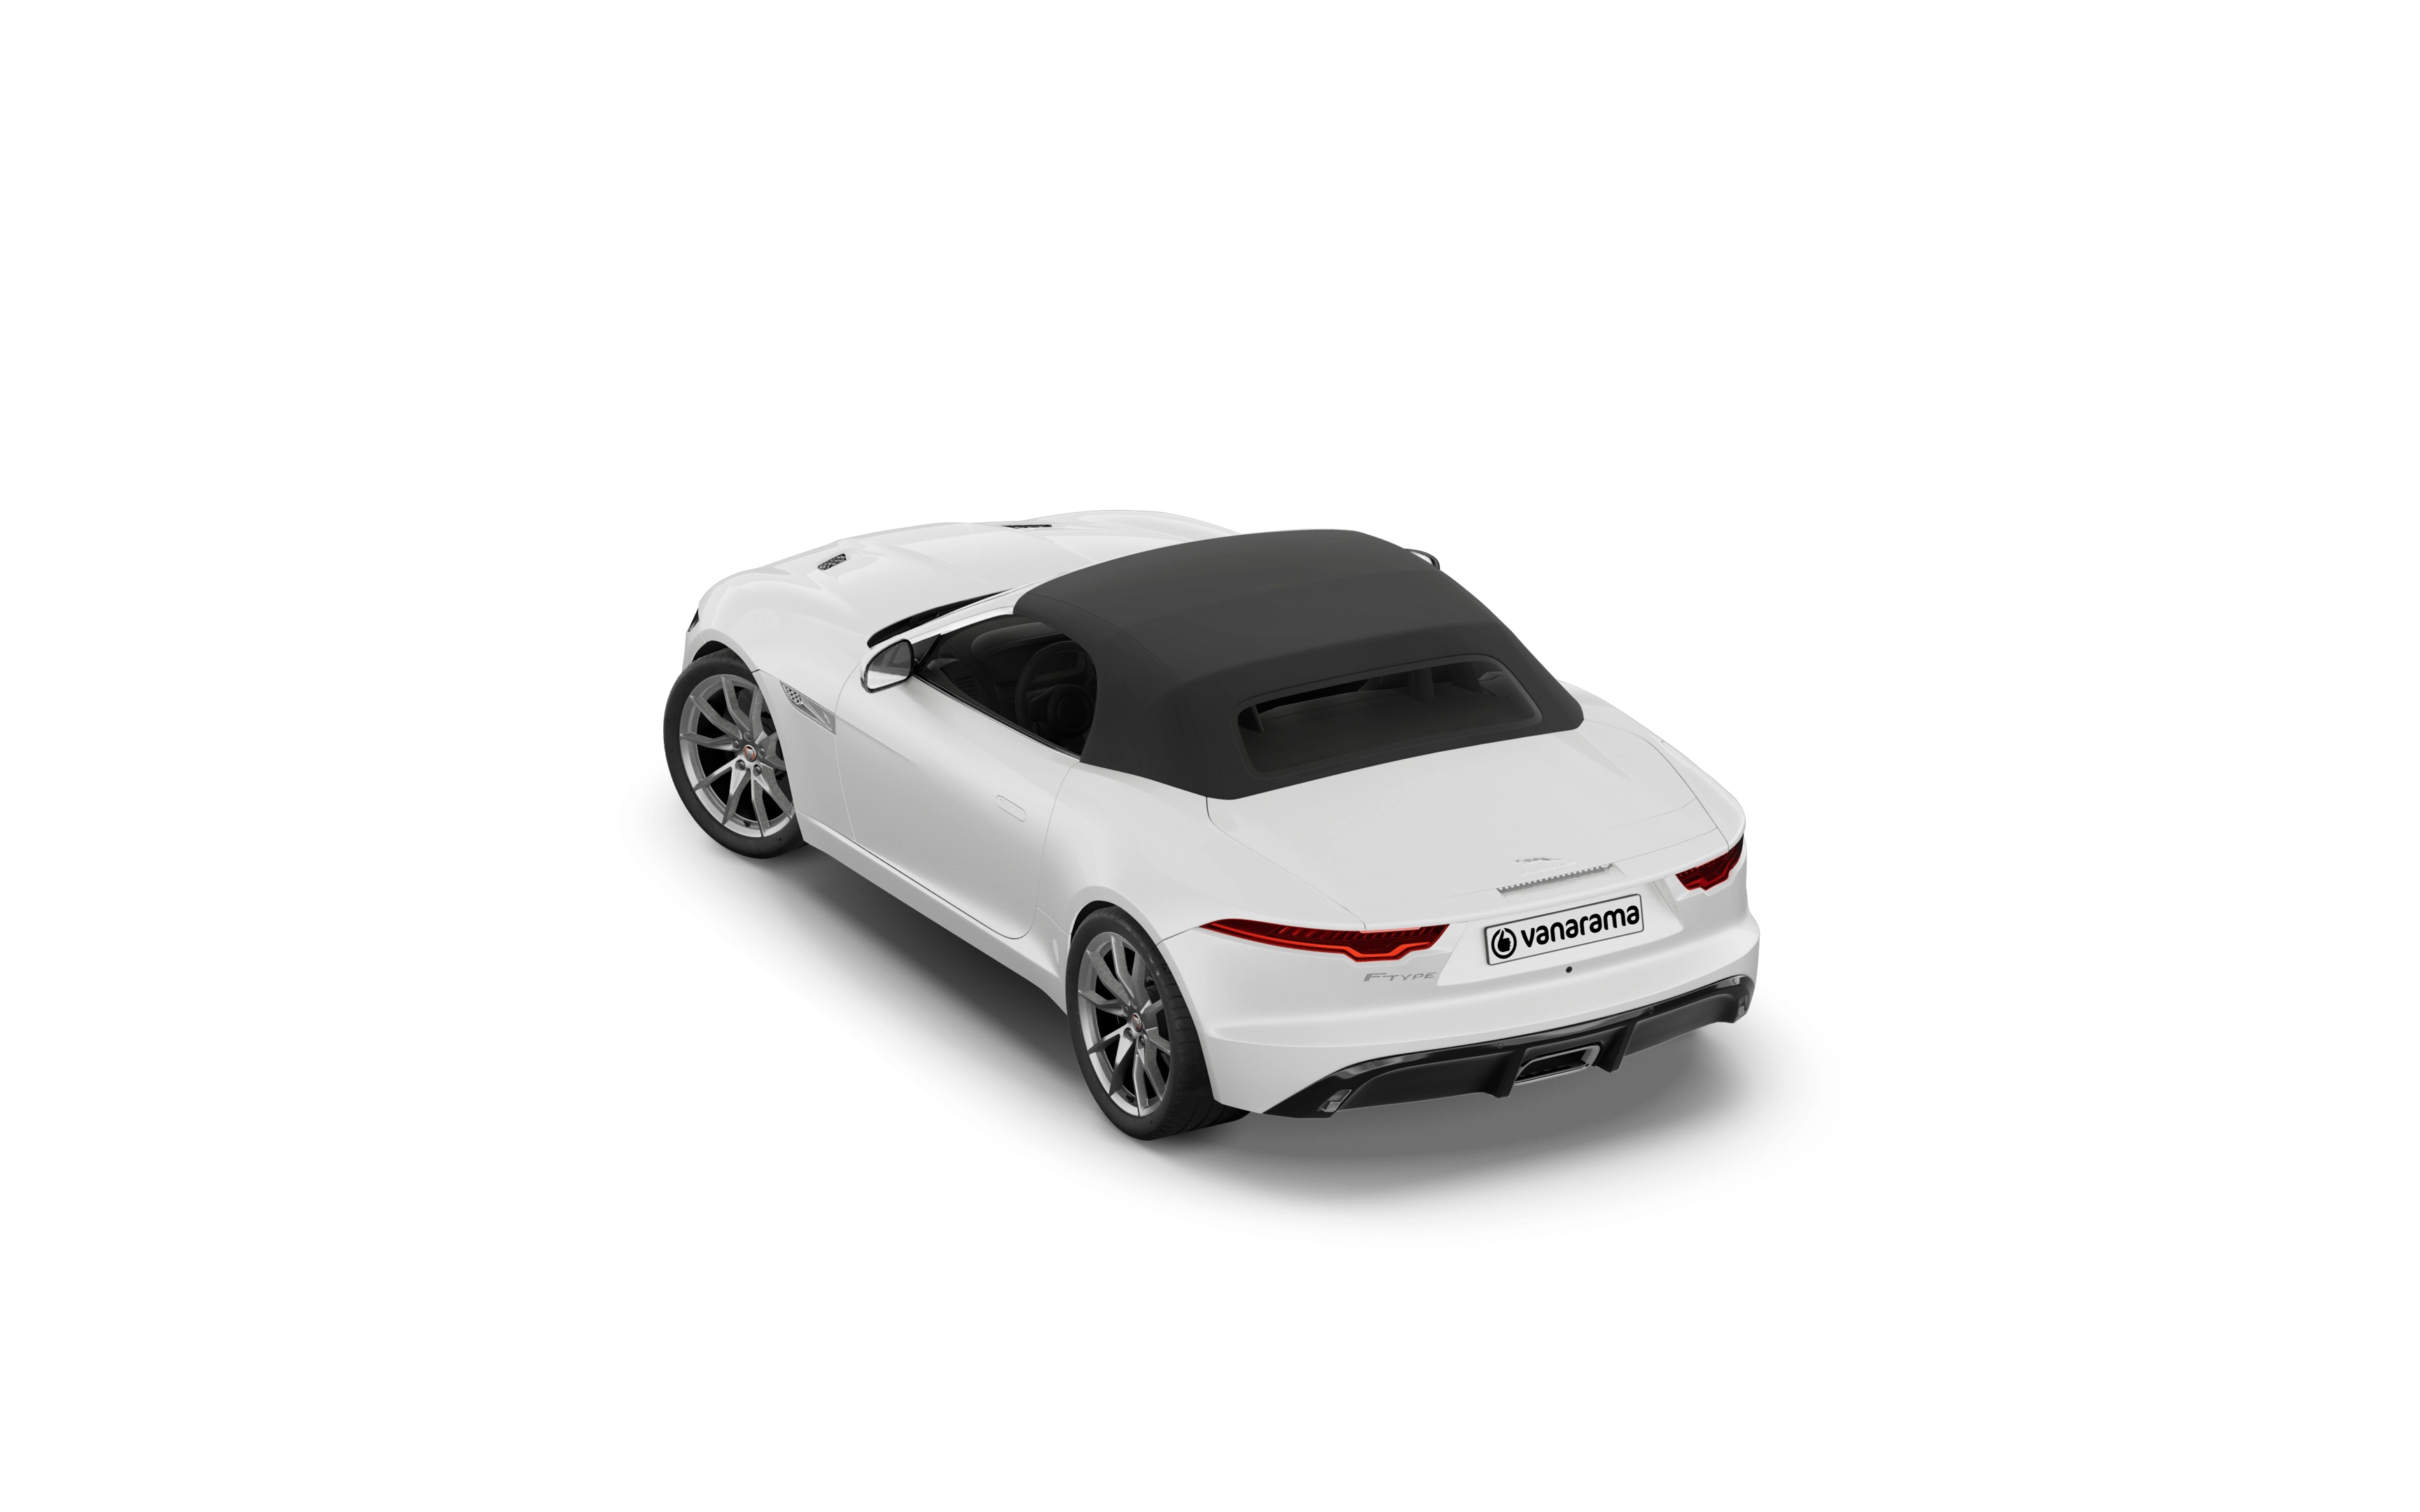 Jaguar f-type convertible 5.0 p450 supercharged v8 r-dynamic 2 doors auto awd